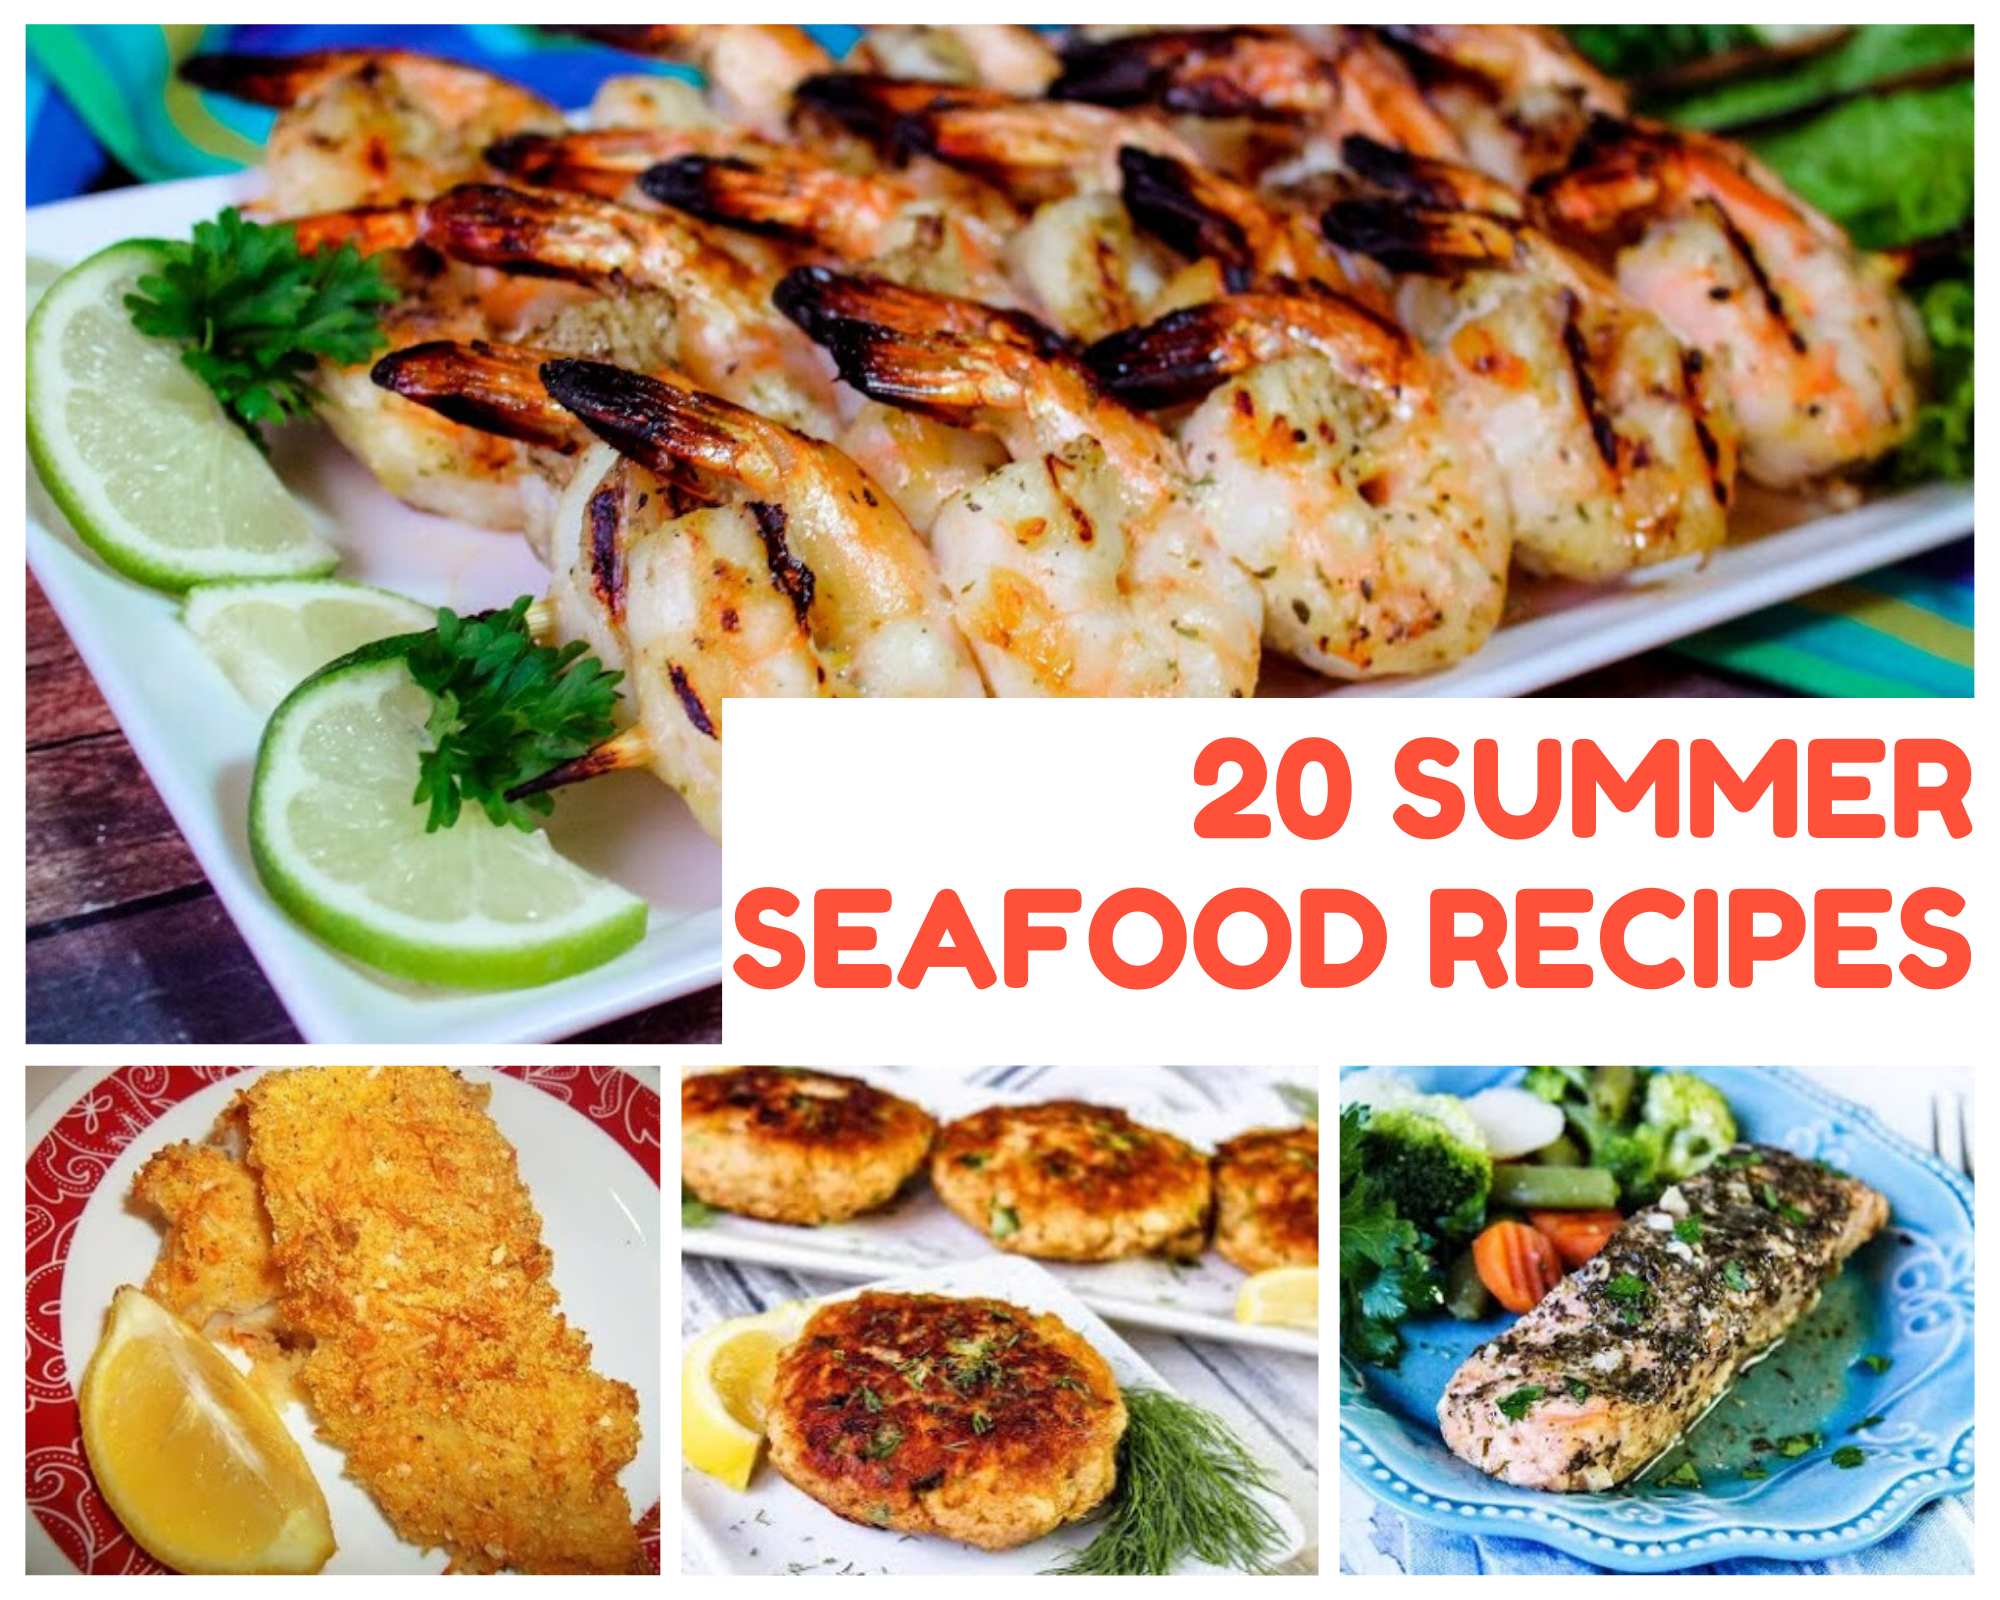 Grilled shrimp, baked cod, salmon patties and more summer seafood recipes